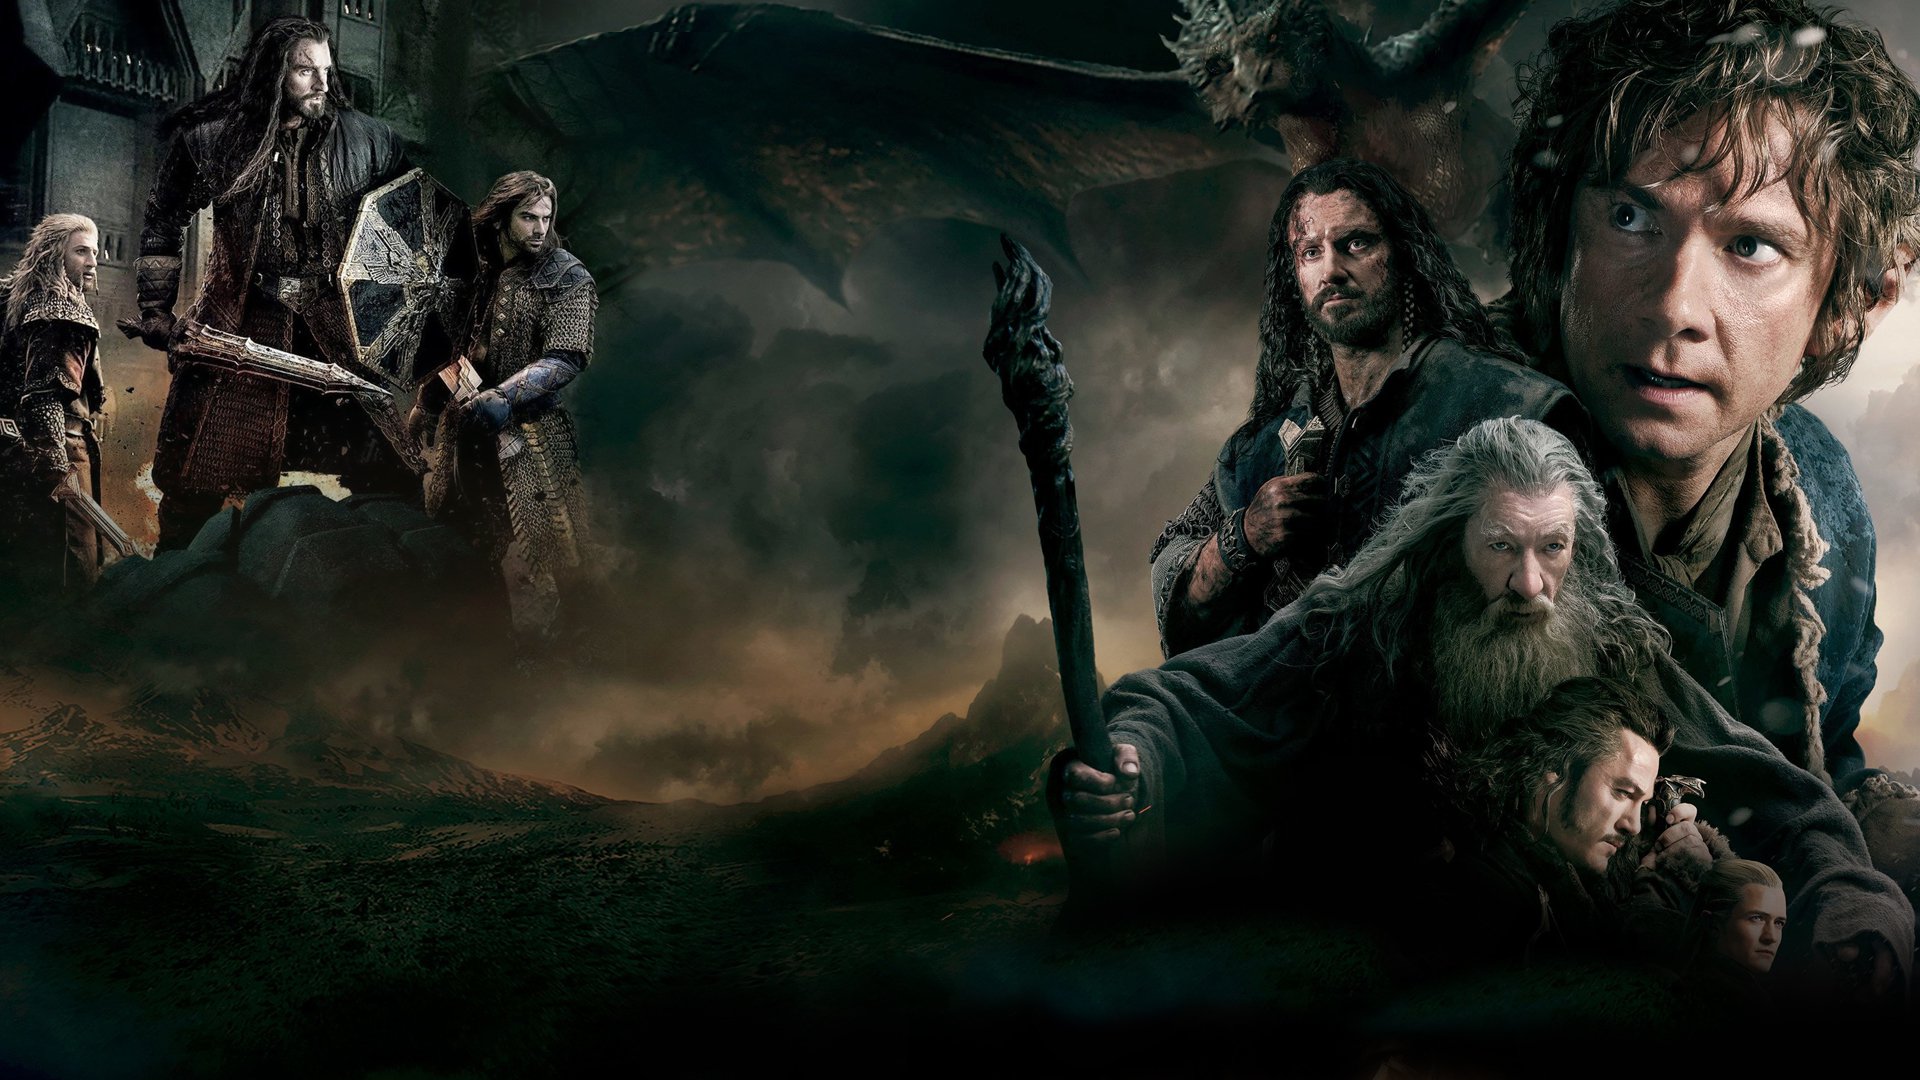 The Hobbit The Battle of the Five Armies HD Wallpaper Background